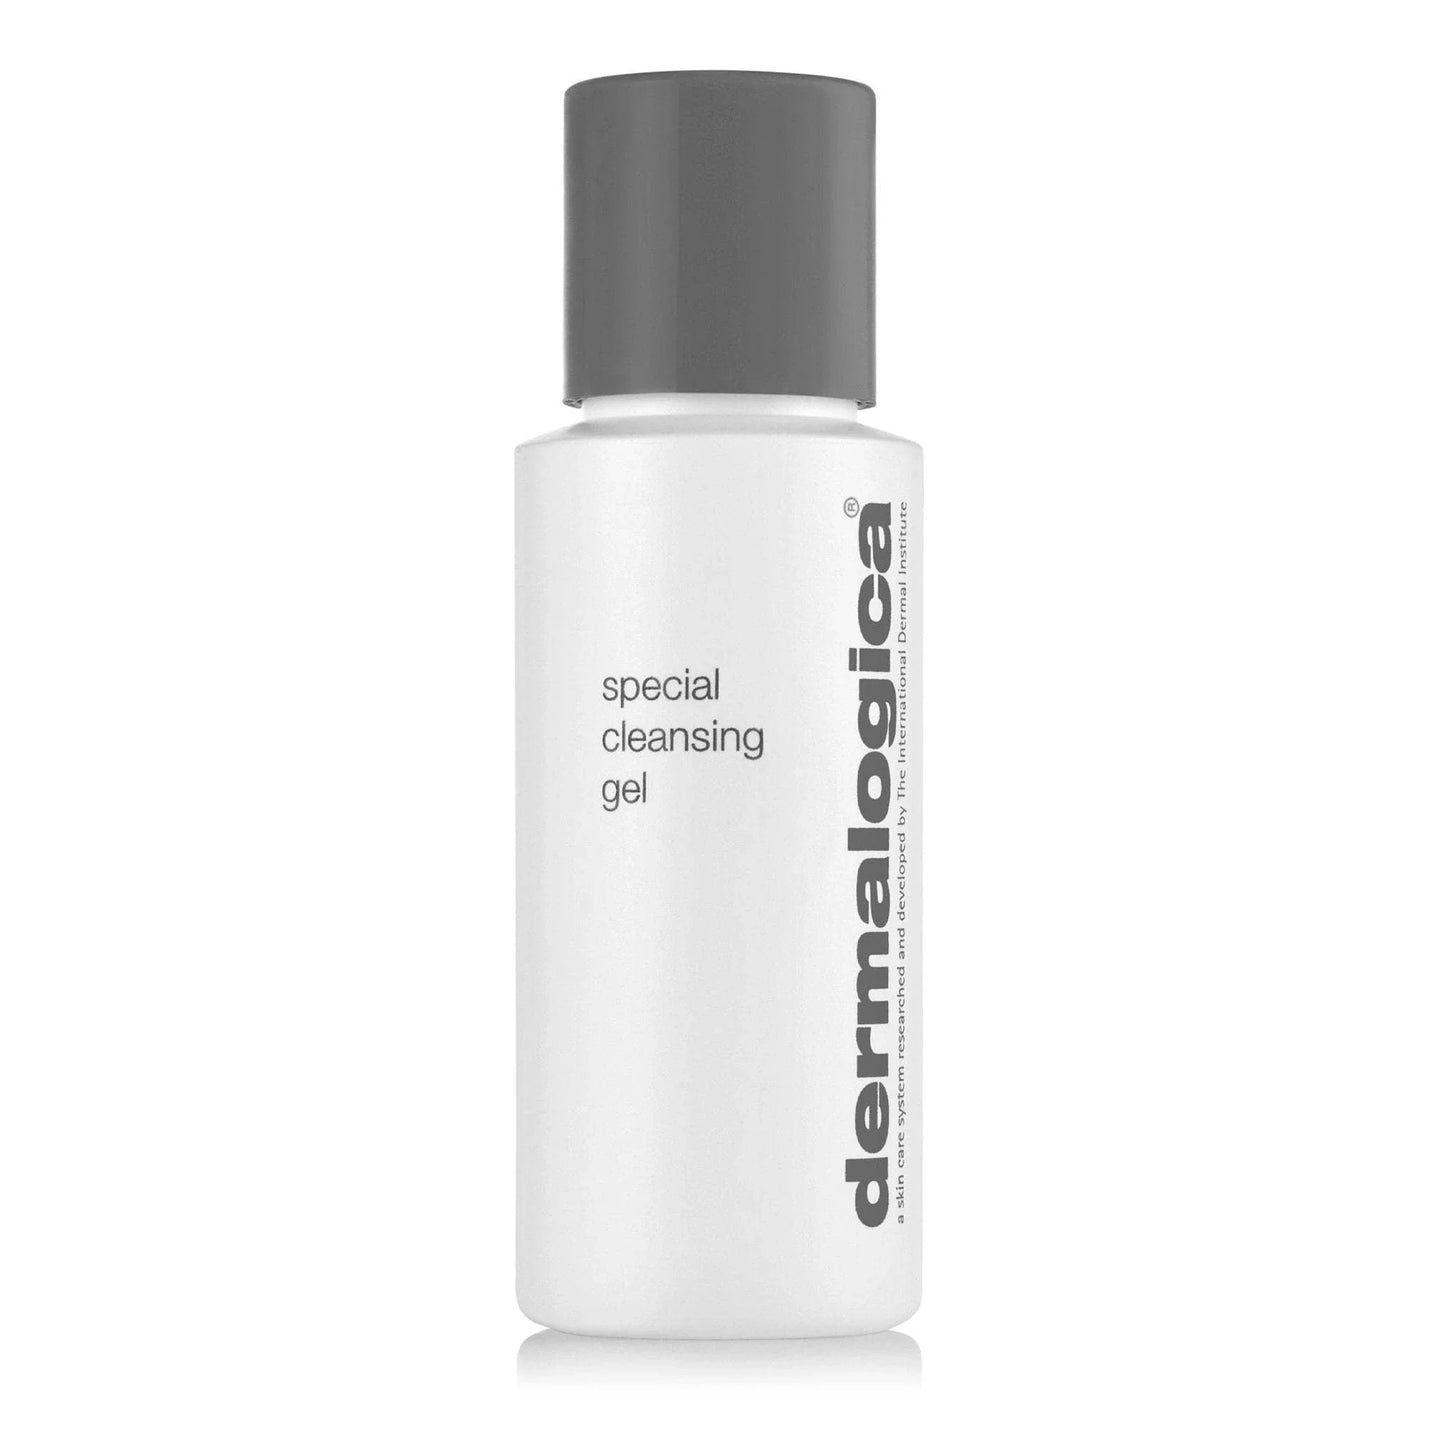 special cleansing gel travel size (free gift)